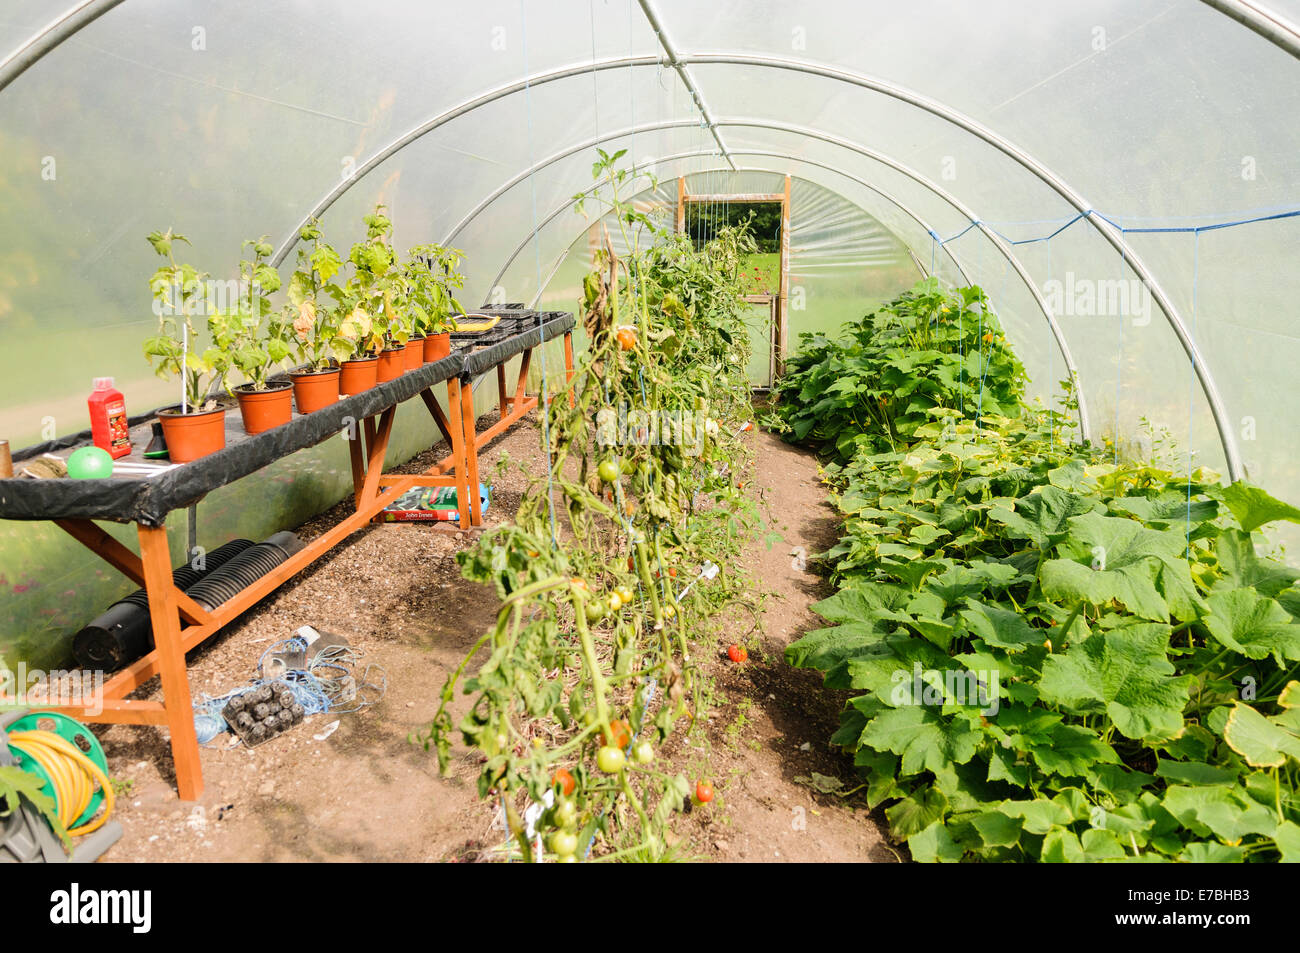 Tomatoes, chillis and courgettes growing in a poly-tunnel greenhouse Stock Photo